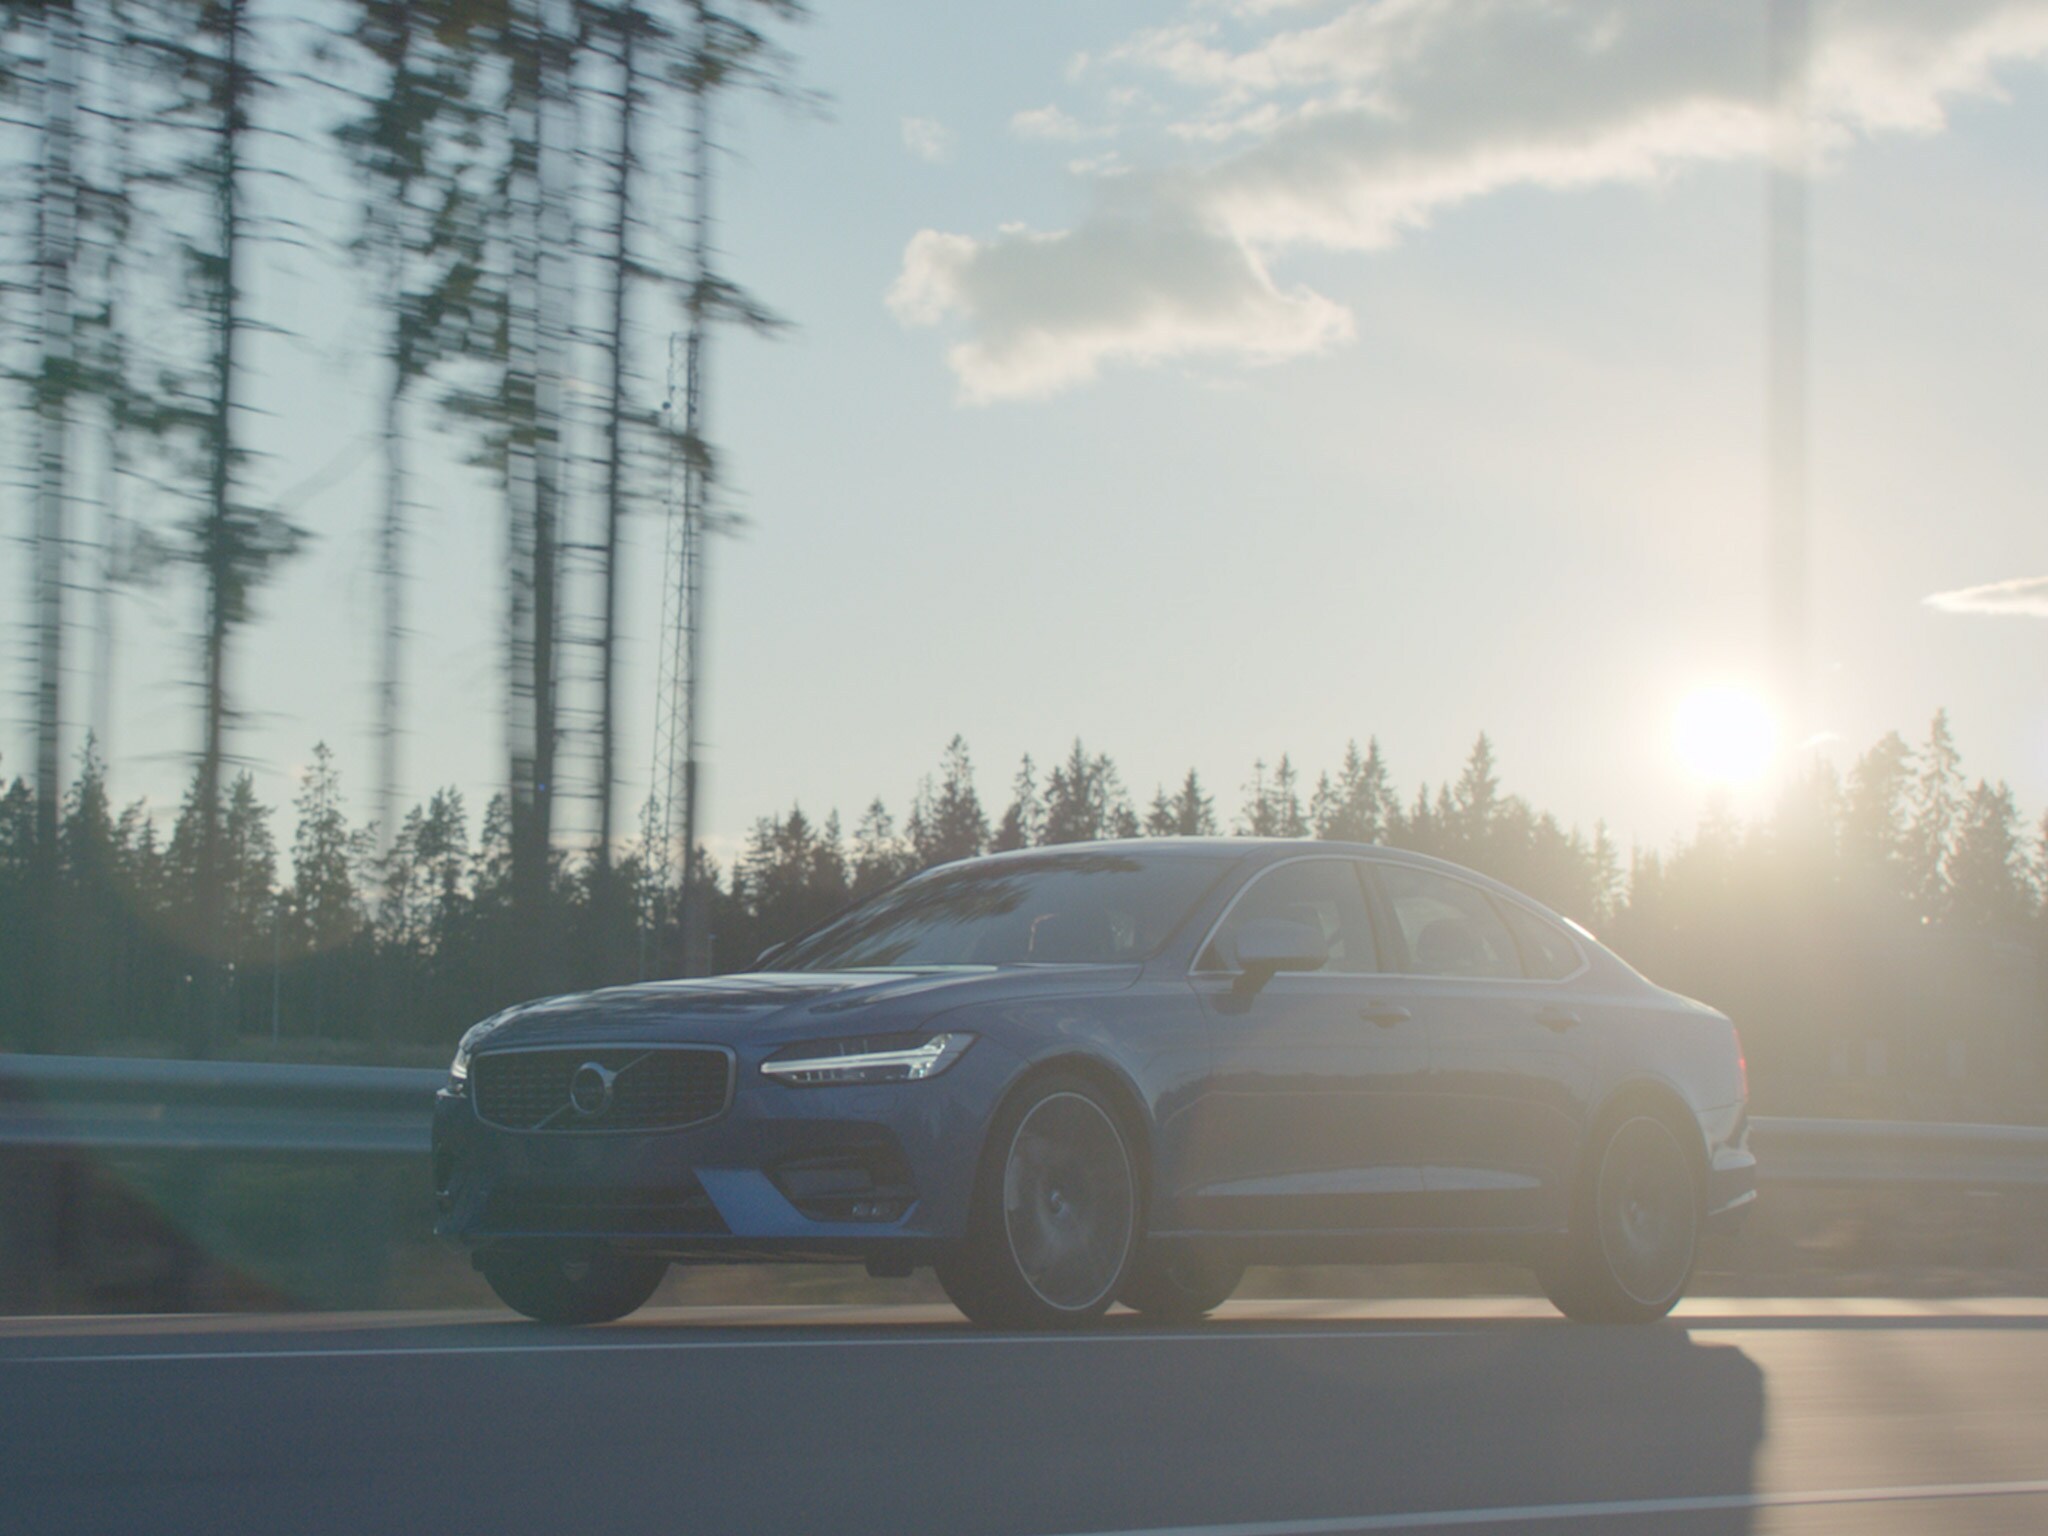 Wide shot of a Denim Blue Volvo S90 saloon car moving along a forested road on a sunny day.